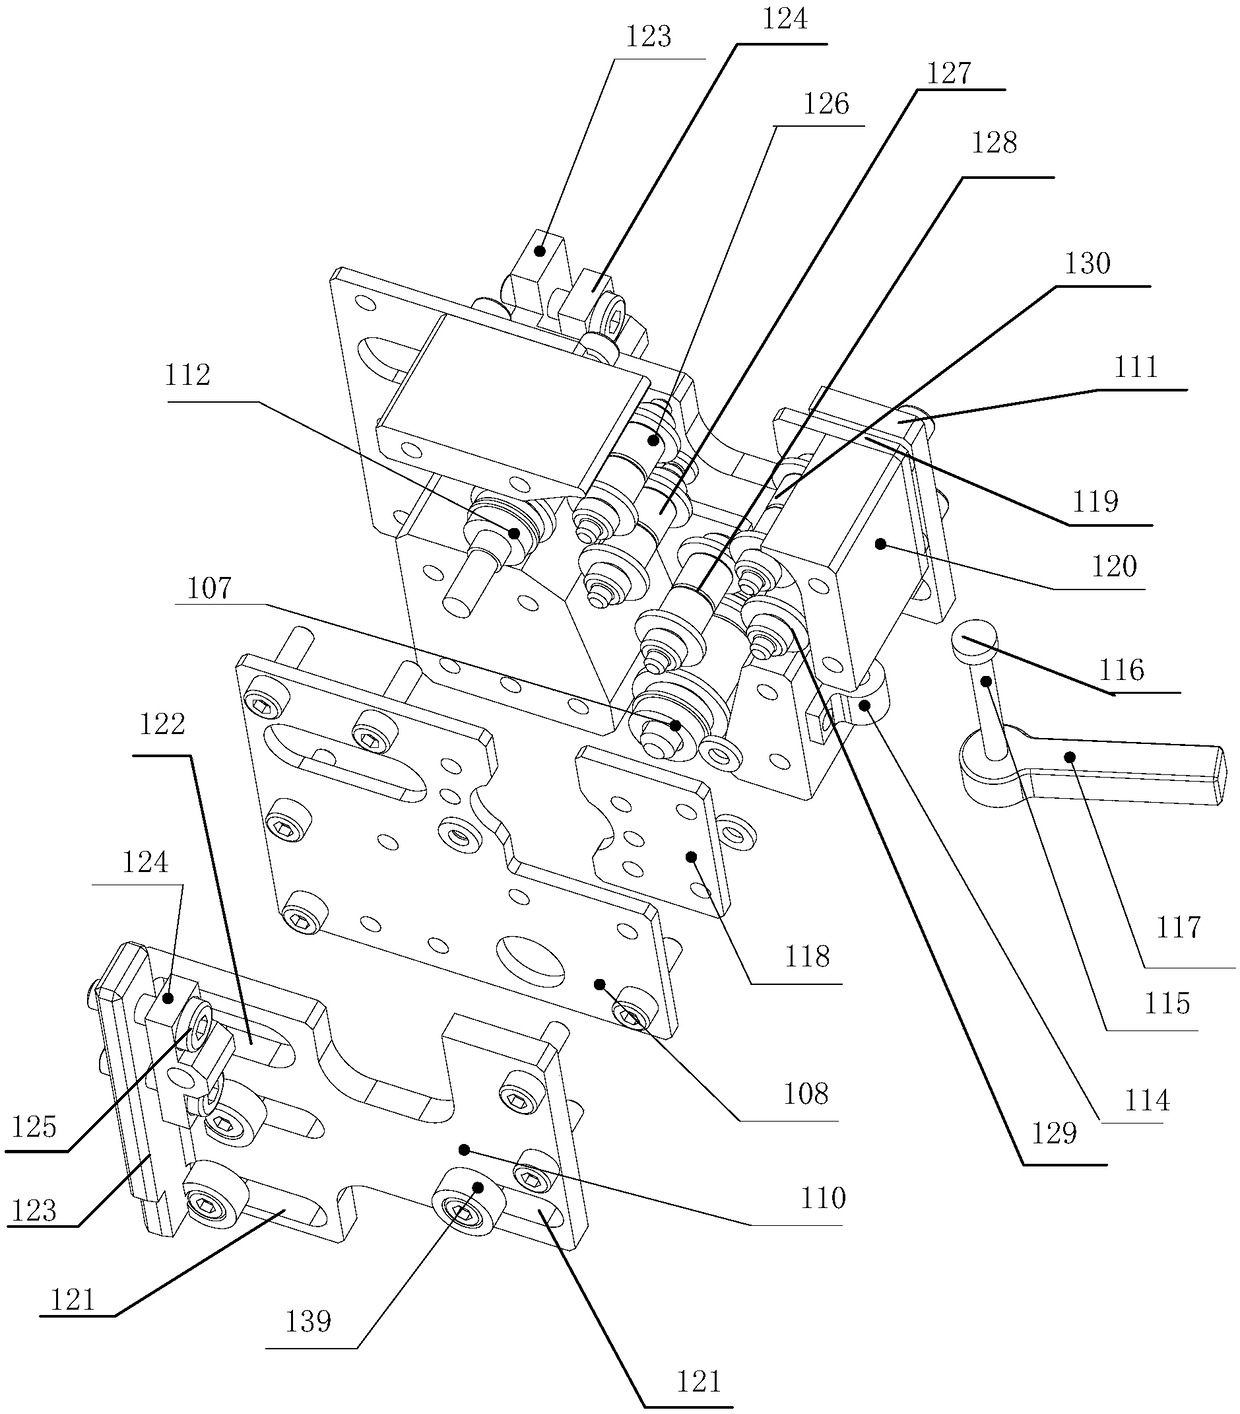 Catheter/wire rotating mechanism and propulsion device for minimally invasive vascular interventional surgery robot